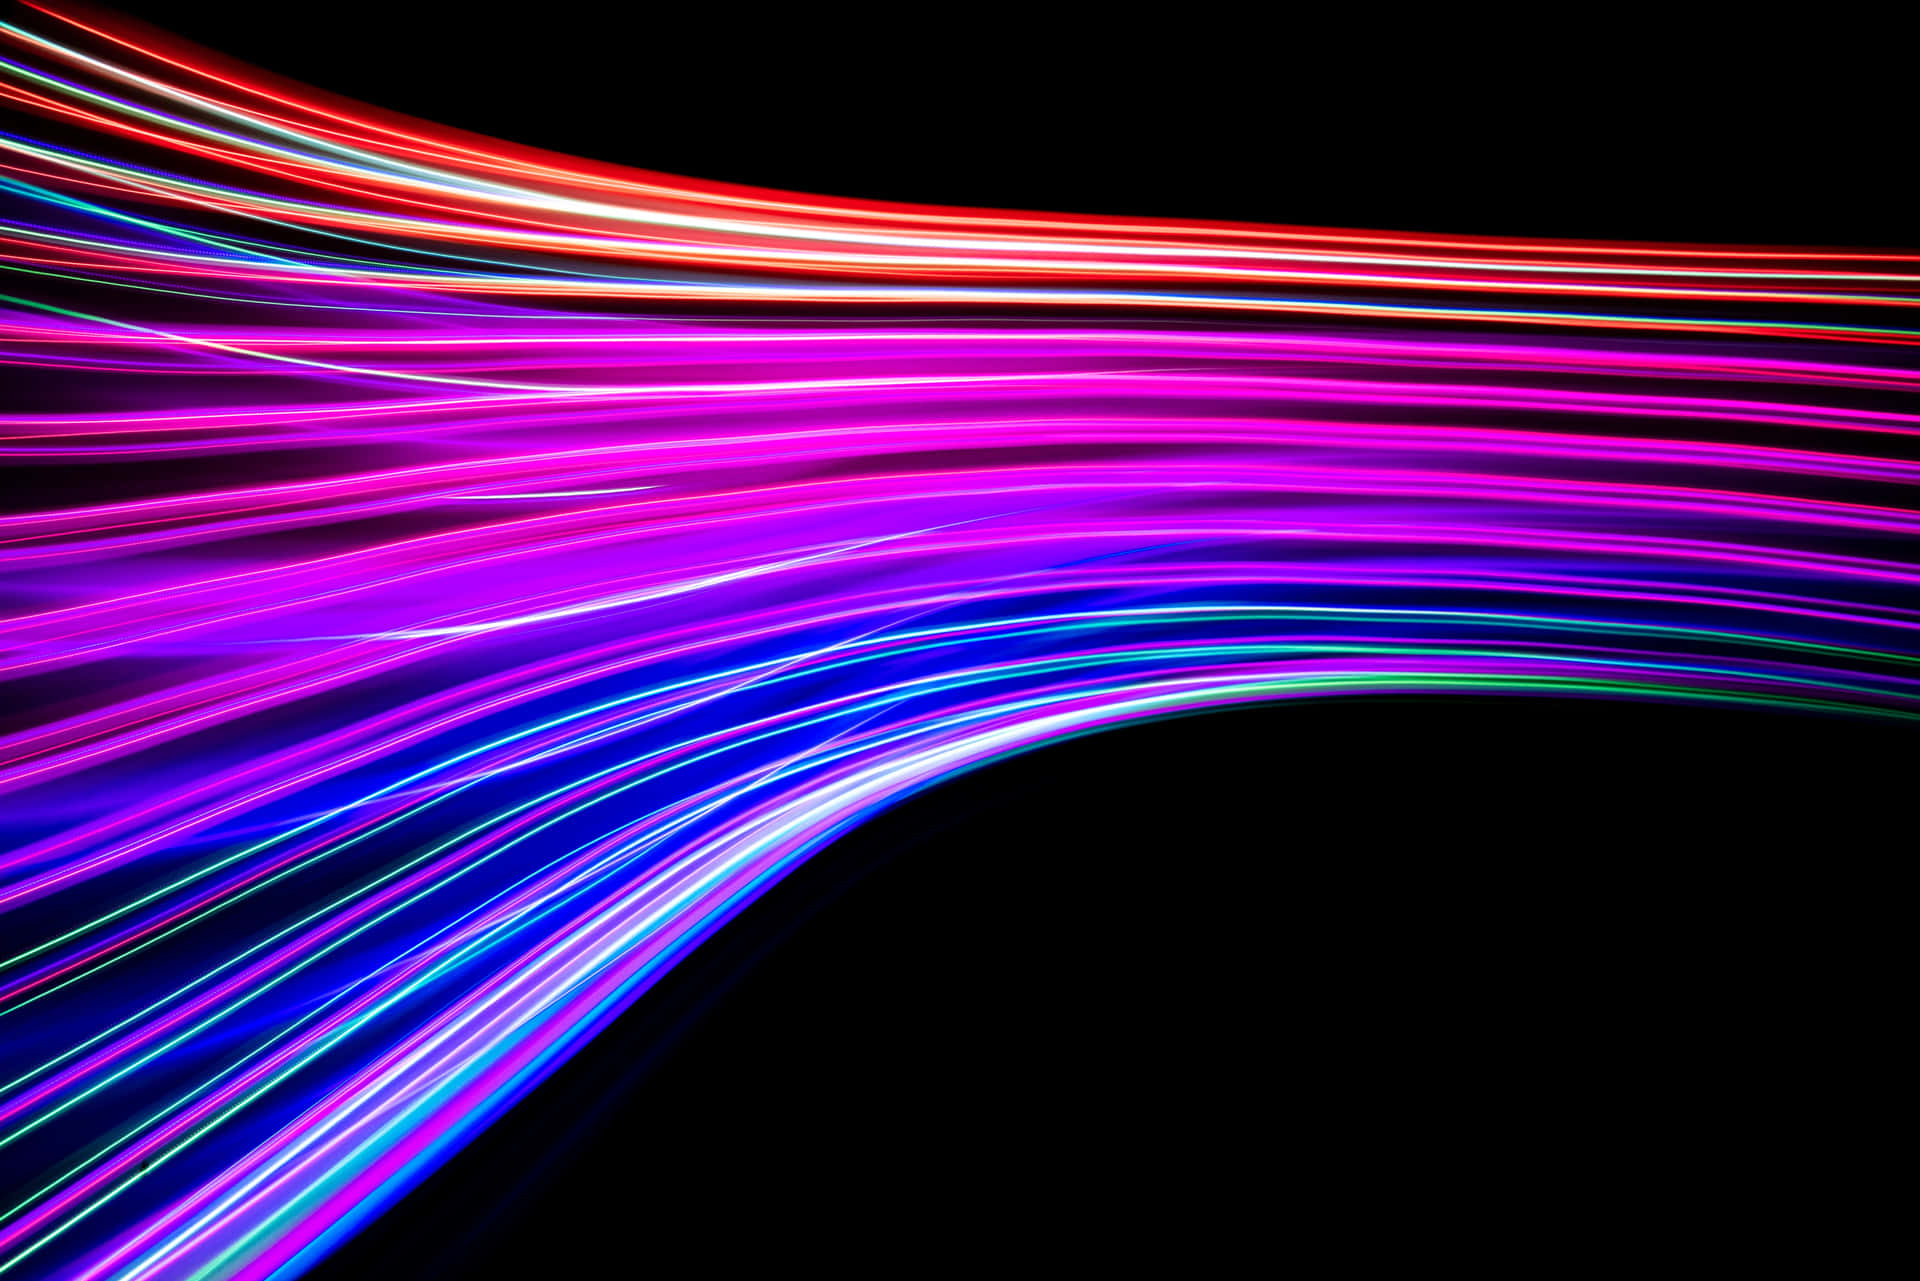 A Colorful Light Wave On A Black Background